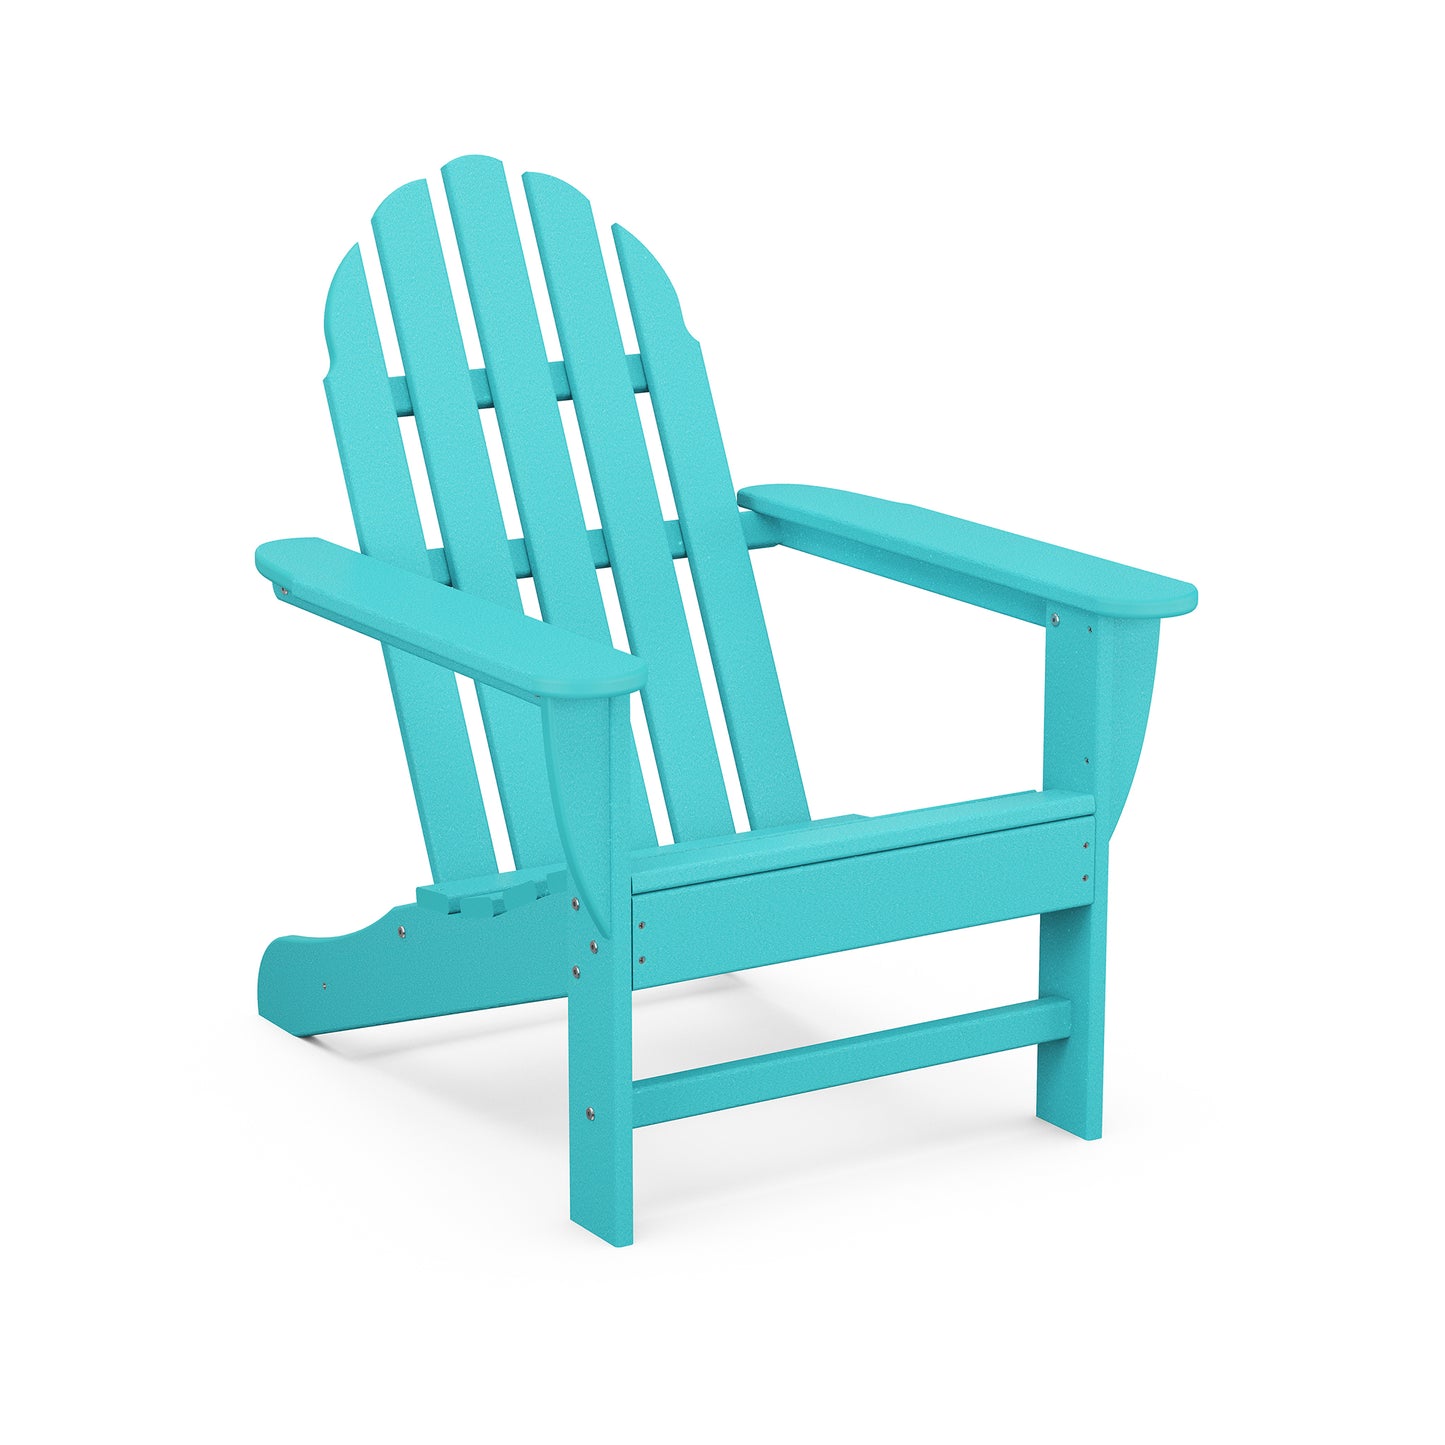 A POLYWOOD Classic Adirondack Chair in turquoise isolated on a white background.